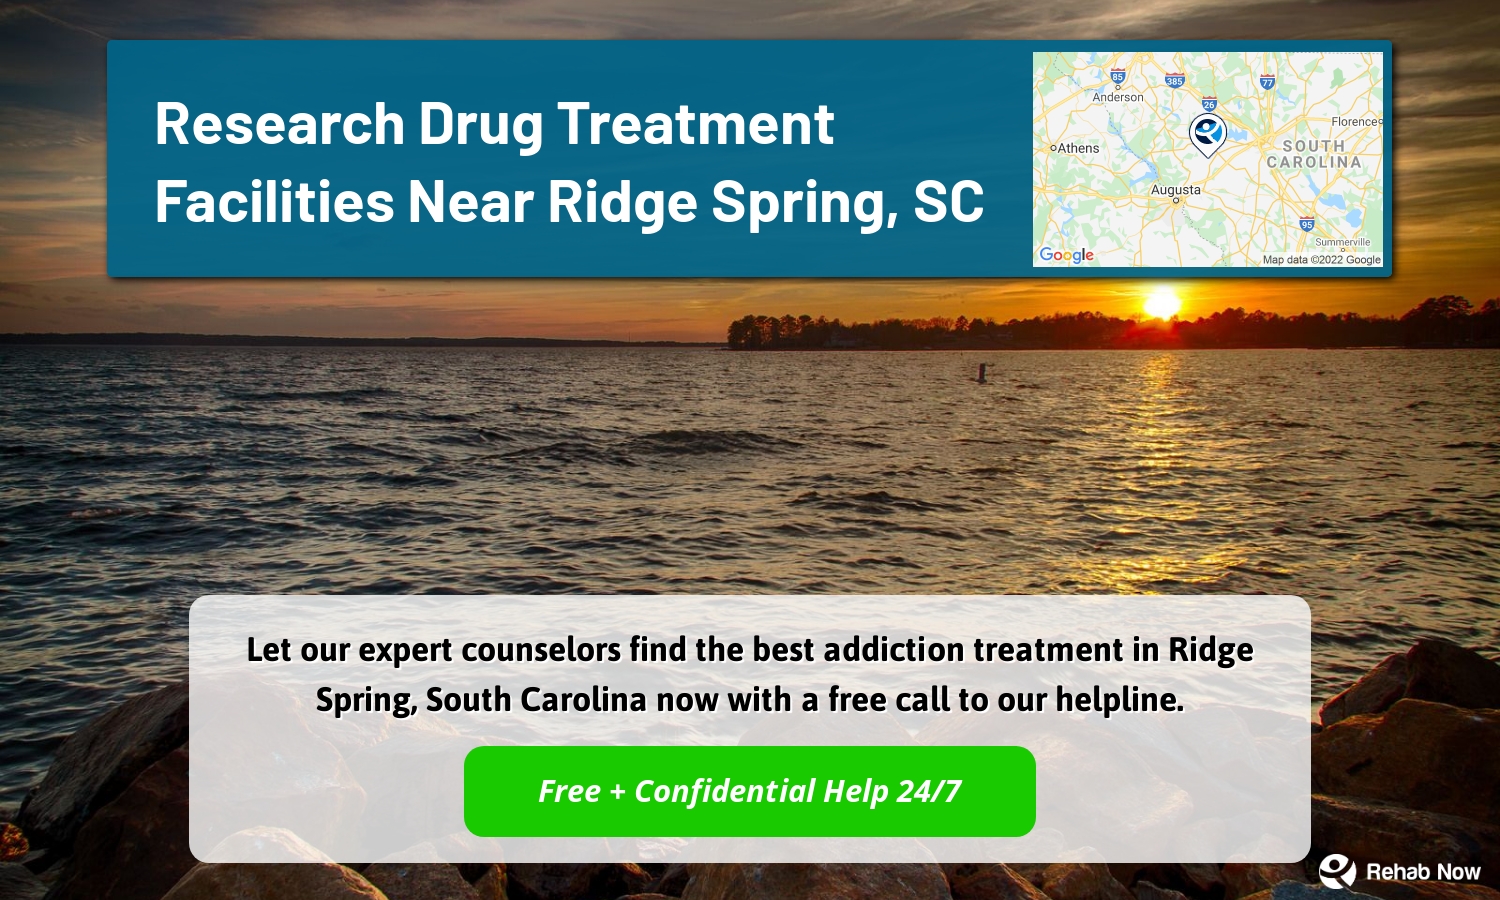 Let our expert counselors find the best addiction treatment in Ridge Spring, South Carolina now with a free call to our helpline.